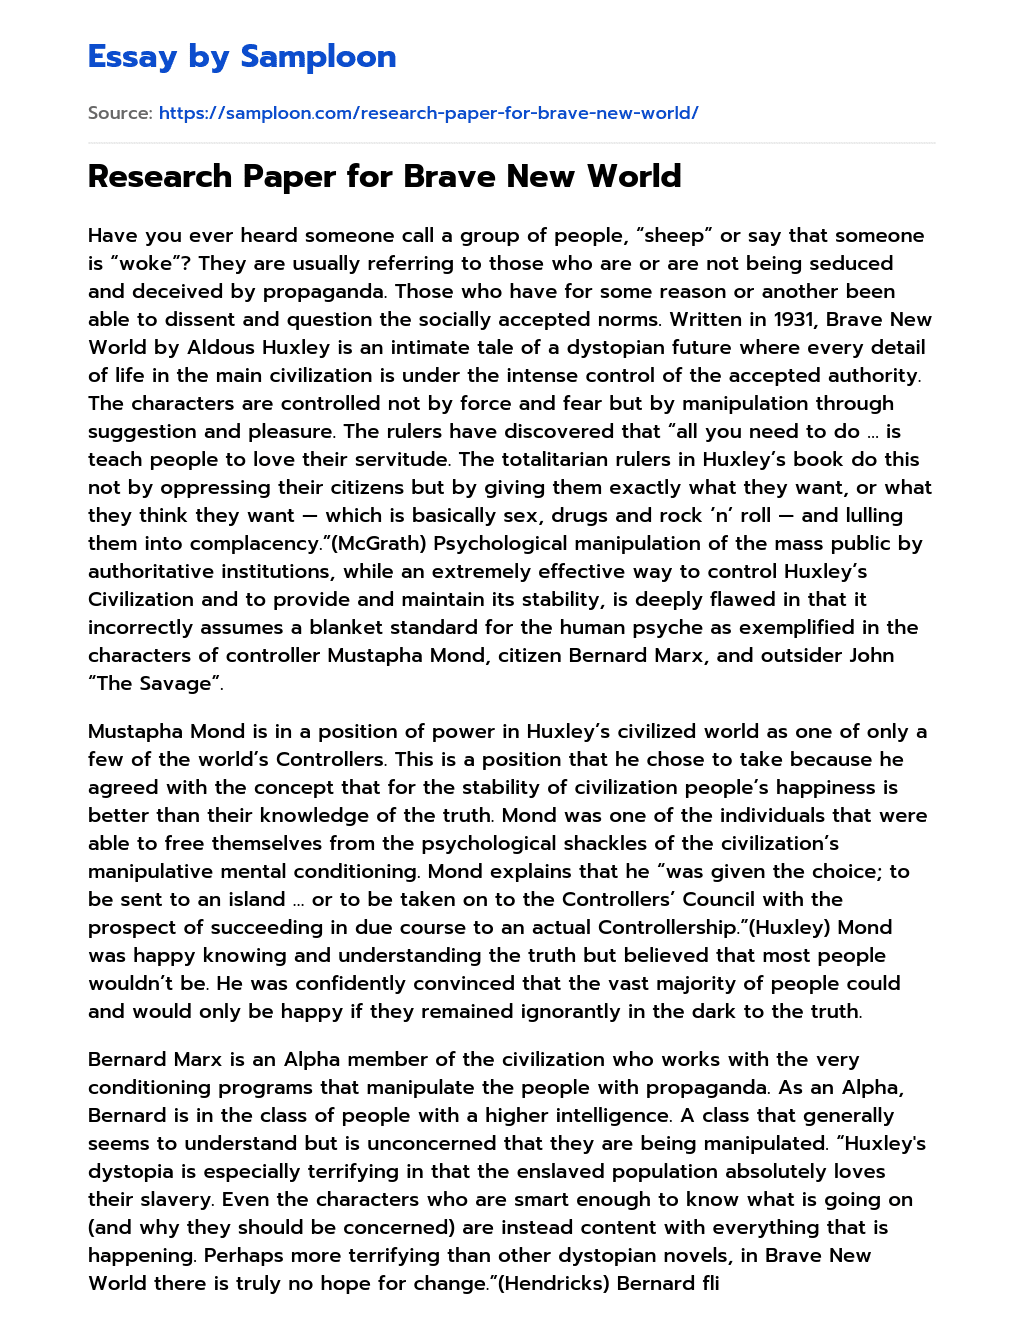 Research Paper for Brave New World essay